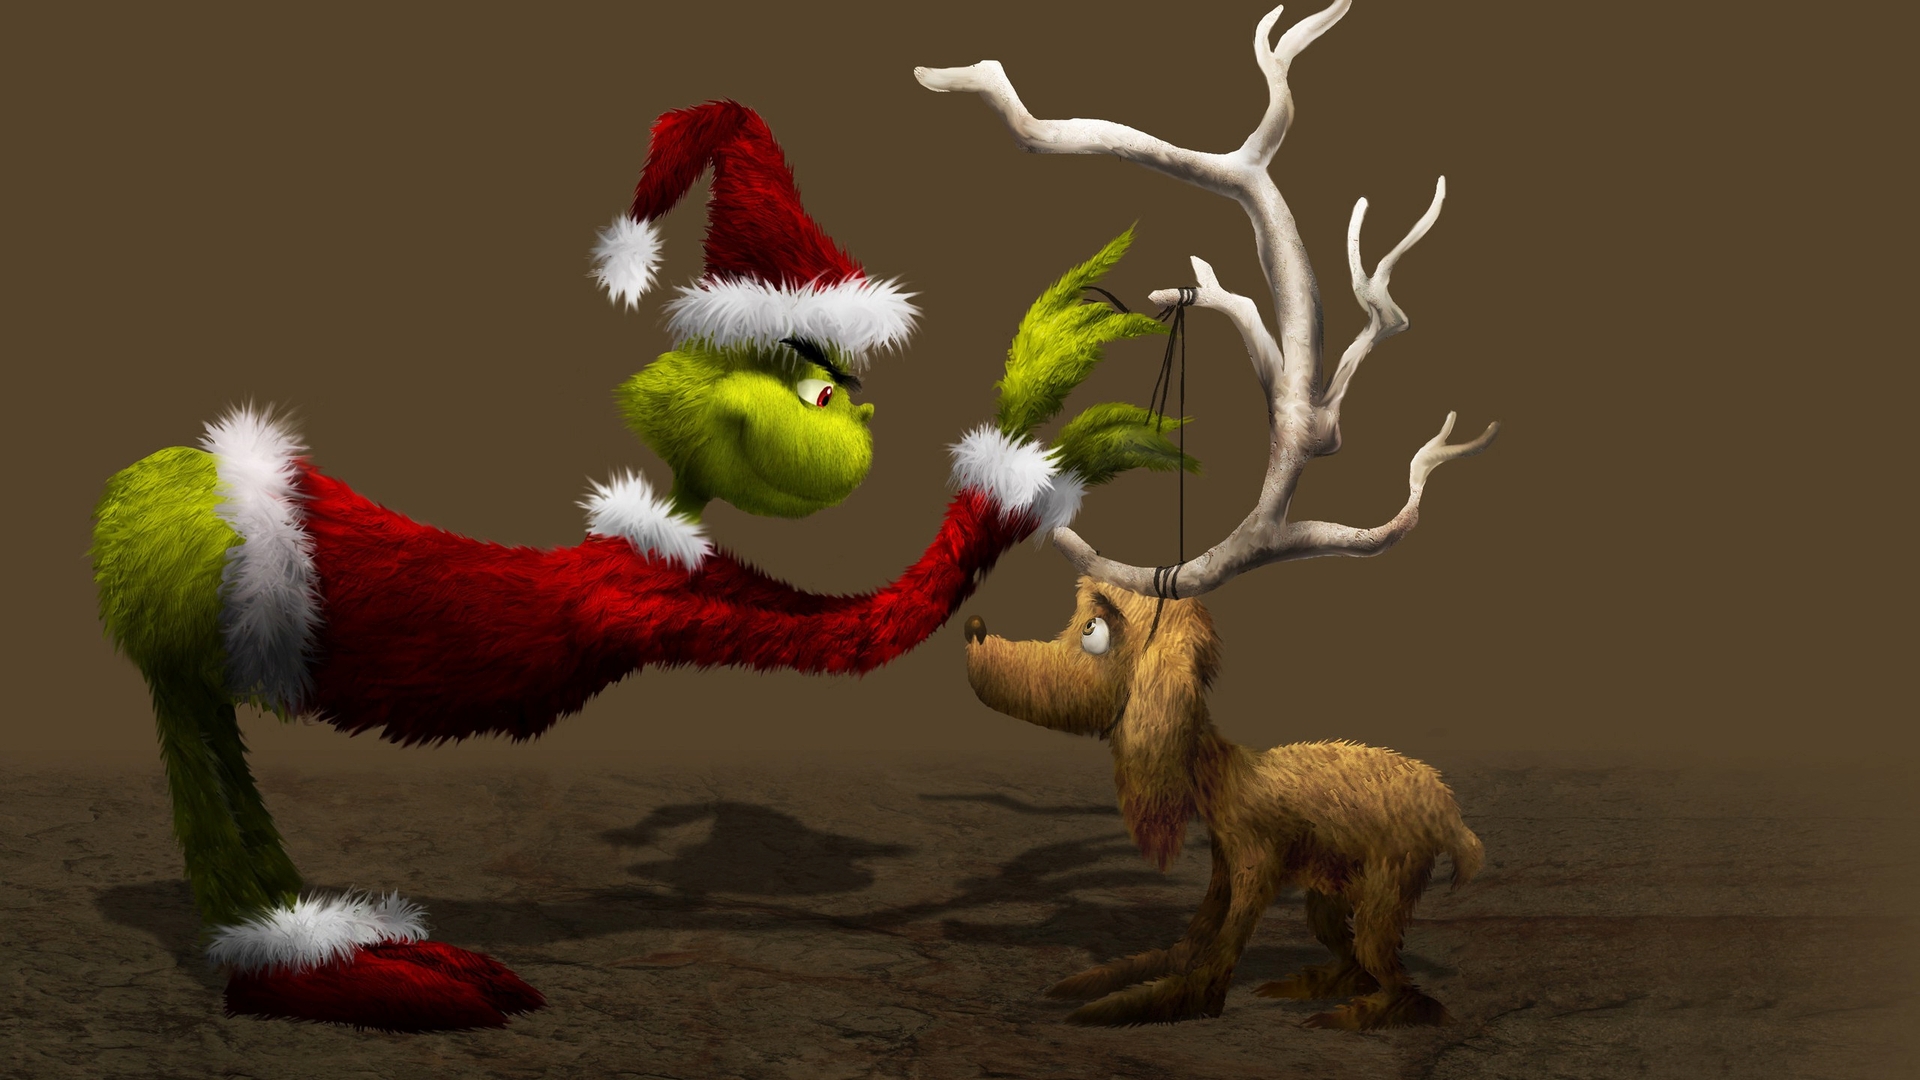 Download The Grinch is plotting to steal Christmas  Wallpaperscom